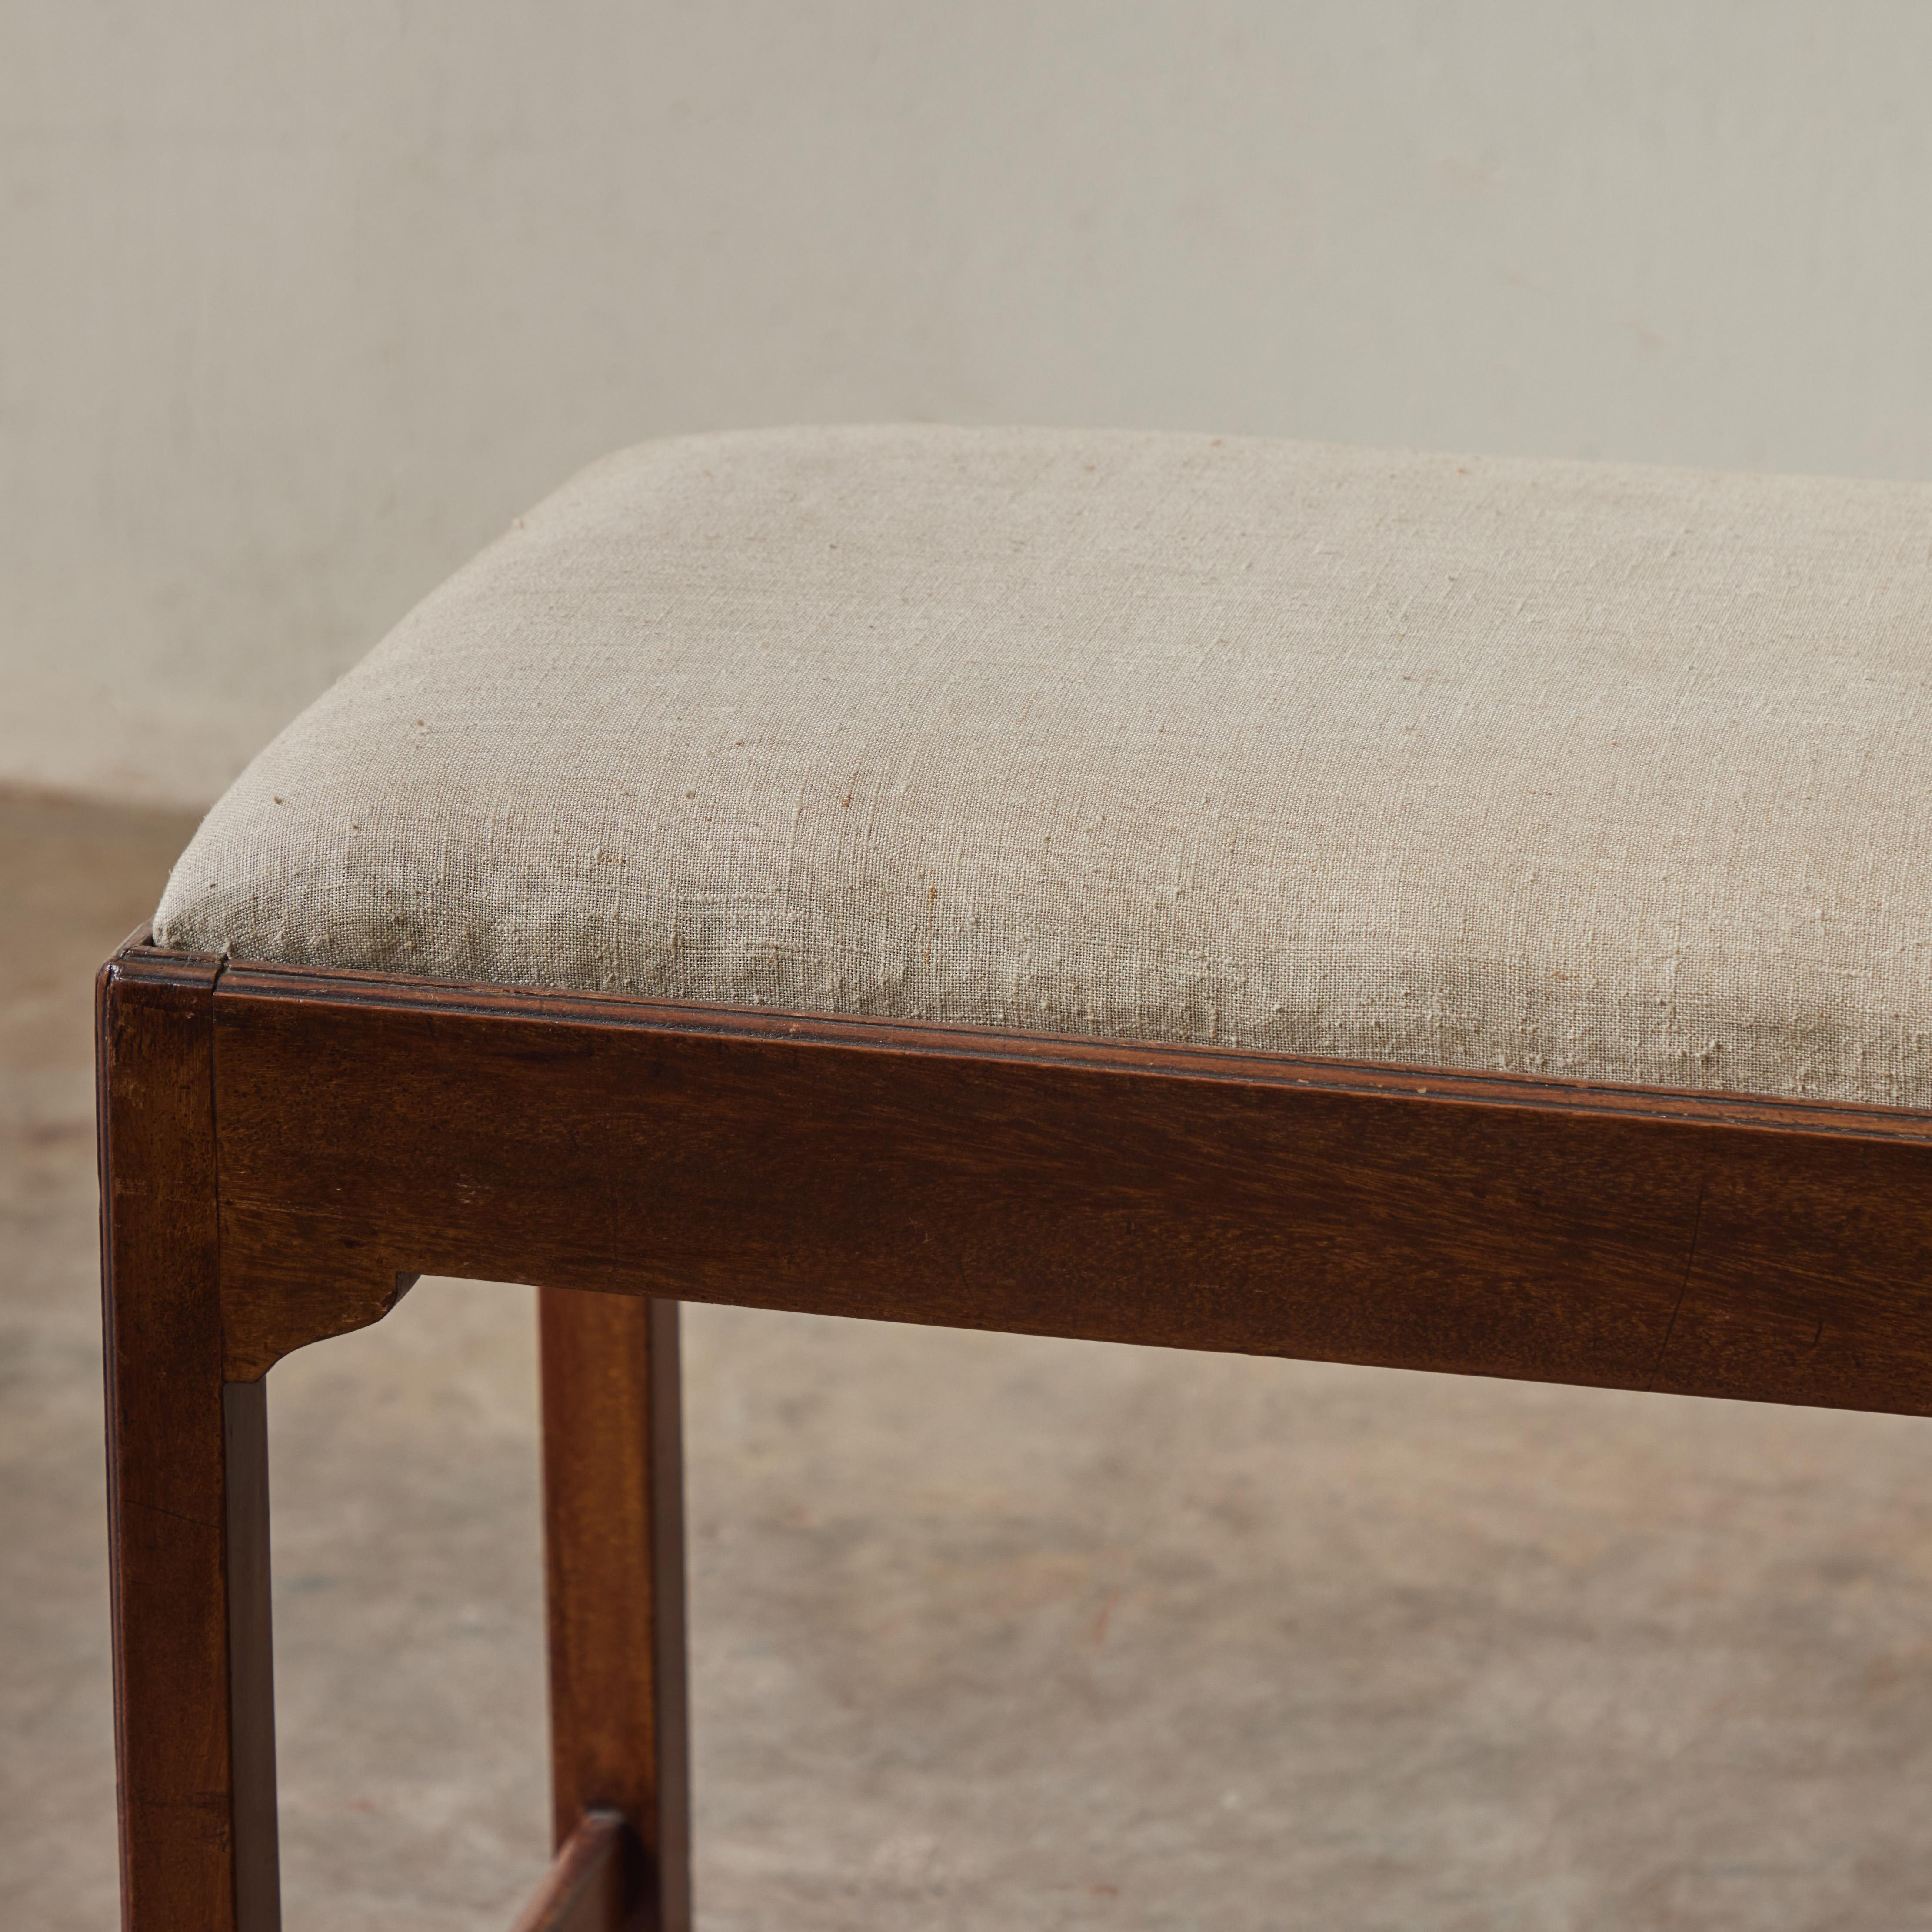 English Arts and Crafts wooden bench from the 1860s, with a beautiful cream colored linen upholstered cushion. With its retrained elegance, the piece has a wonderfully understated, timeless appeal. 

England, circa 1860

DimensionsL 30W x 15D x